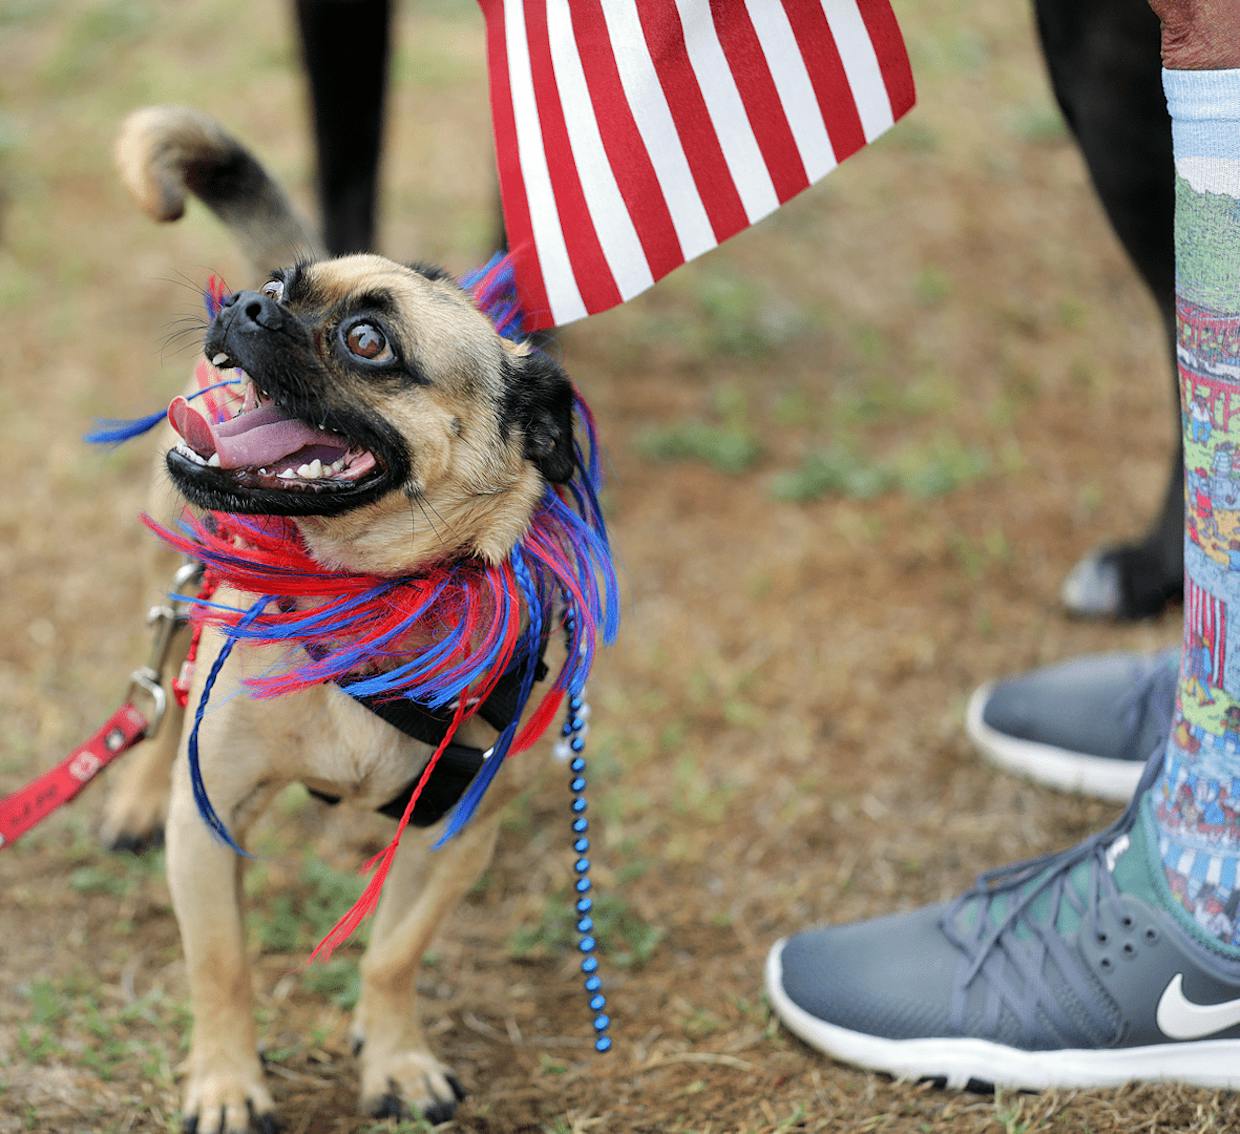 A happy participant in Monday’s annual Pets and People Promenade hosted by New Frontier Animal Medical Center. The event is part of Sierra Vista’s Independence Day festivities held in Veterans Memorial Park.